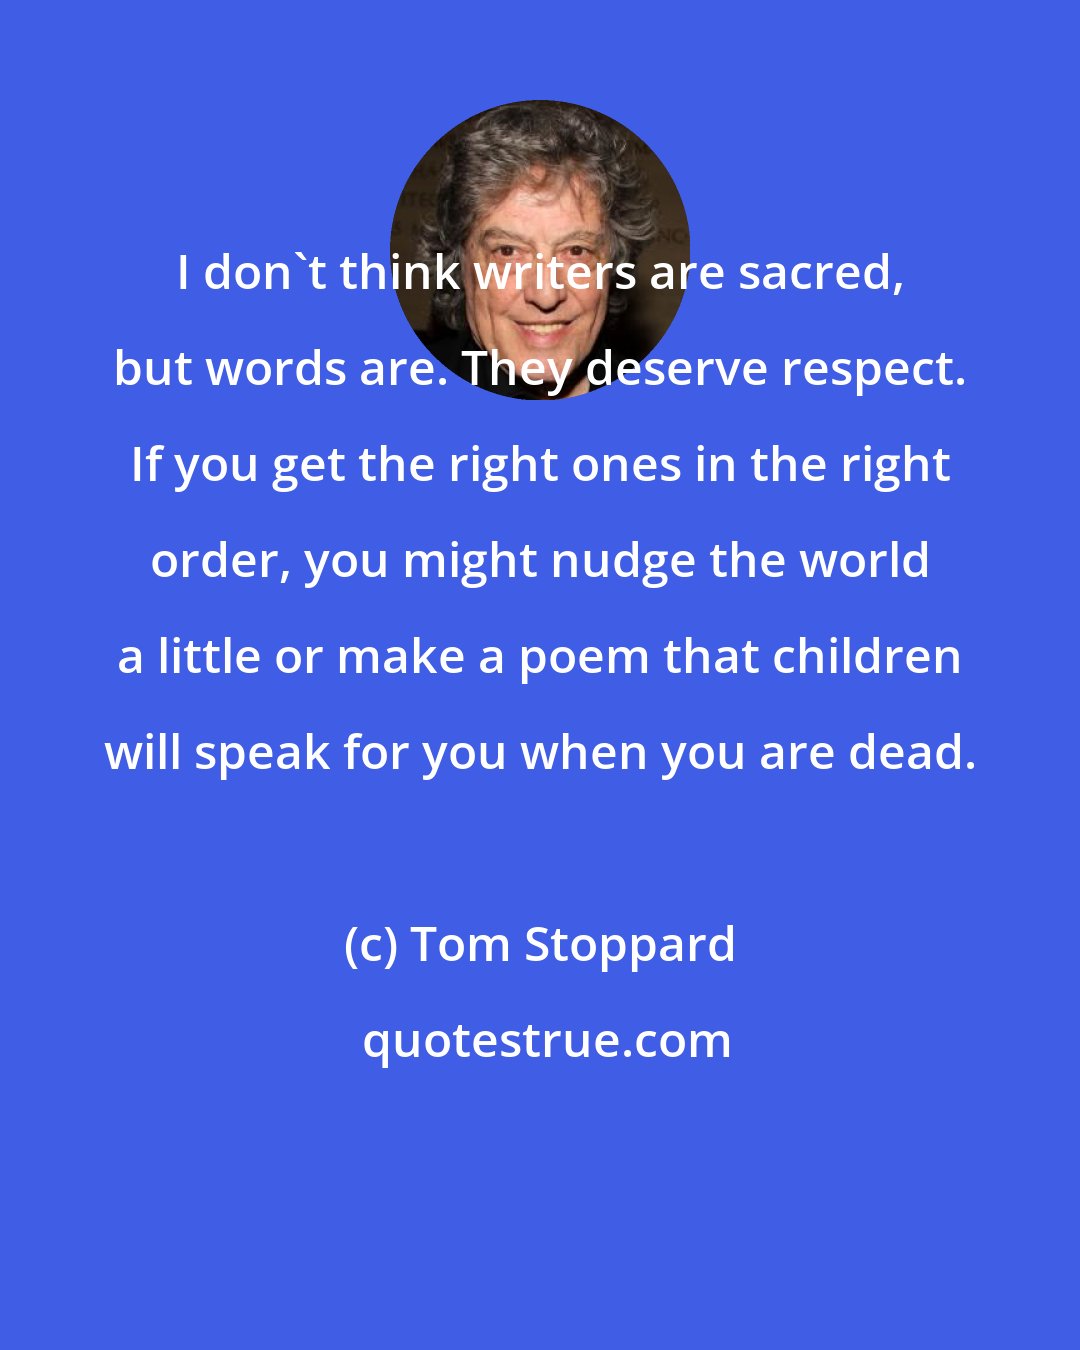 Tom Stoppard: I don't think writers are sacred, but words are. They deserve respect. If you get the right ones in the right order, you might nudge the world a little or make a poem that children will speak for you when you are dead.